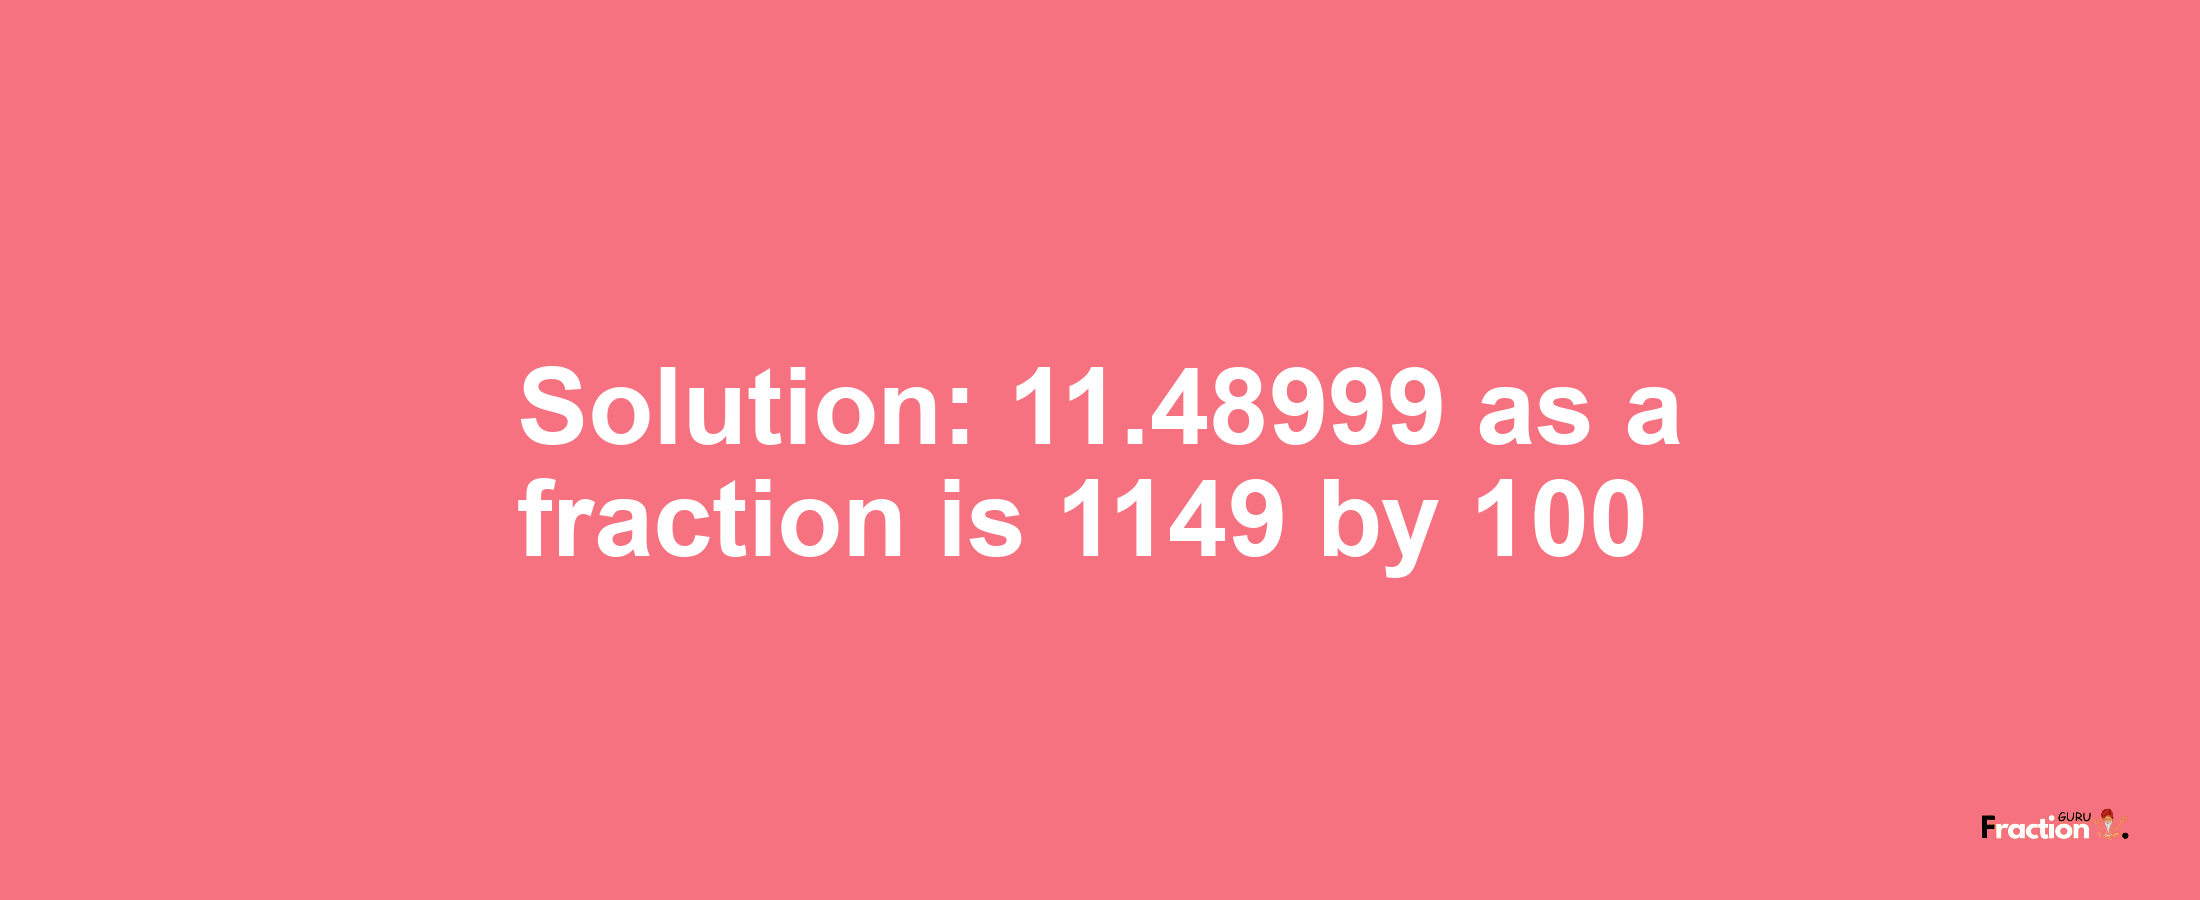 Solution:11.48999 as a fraction is 1149/100